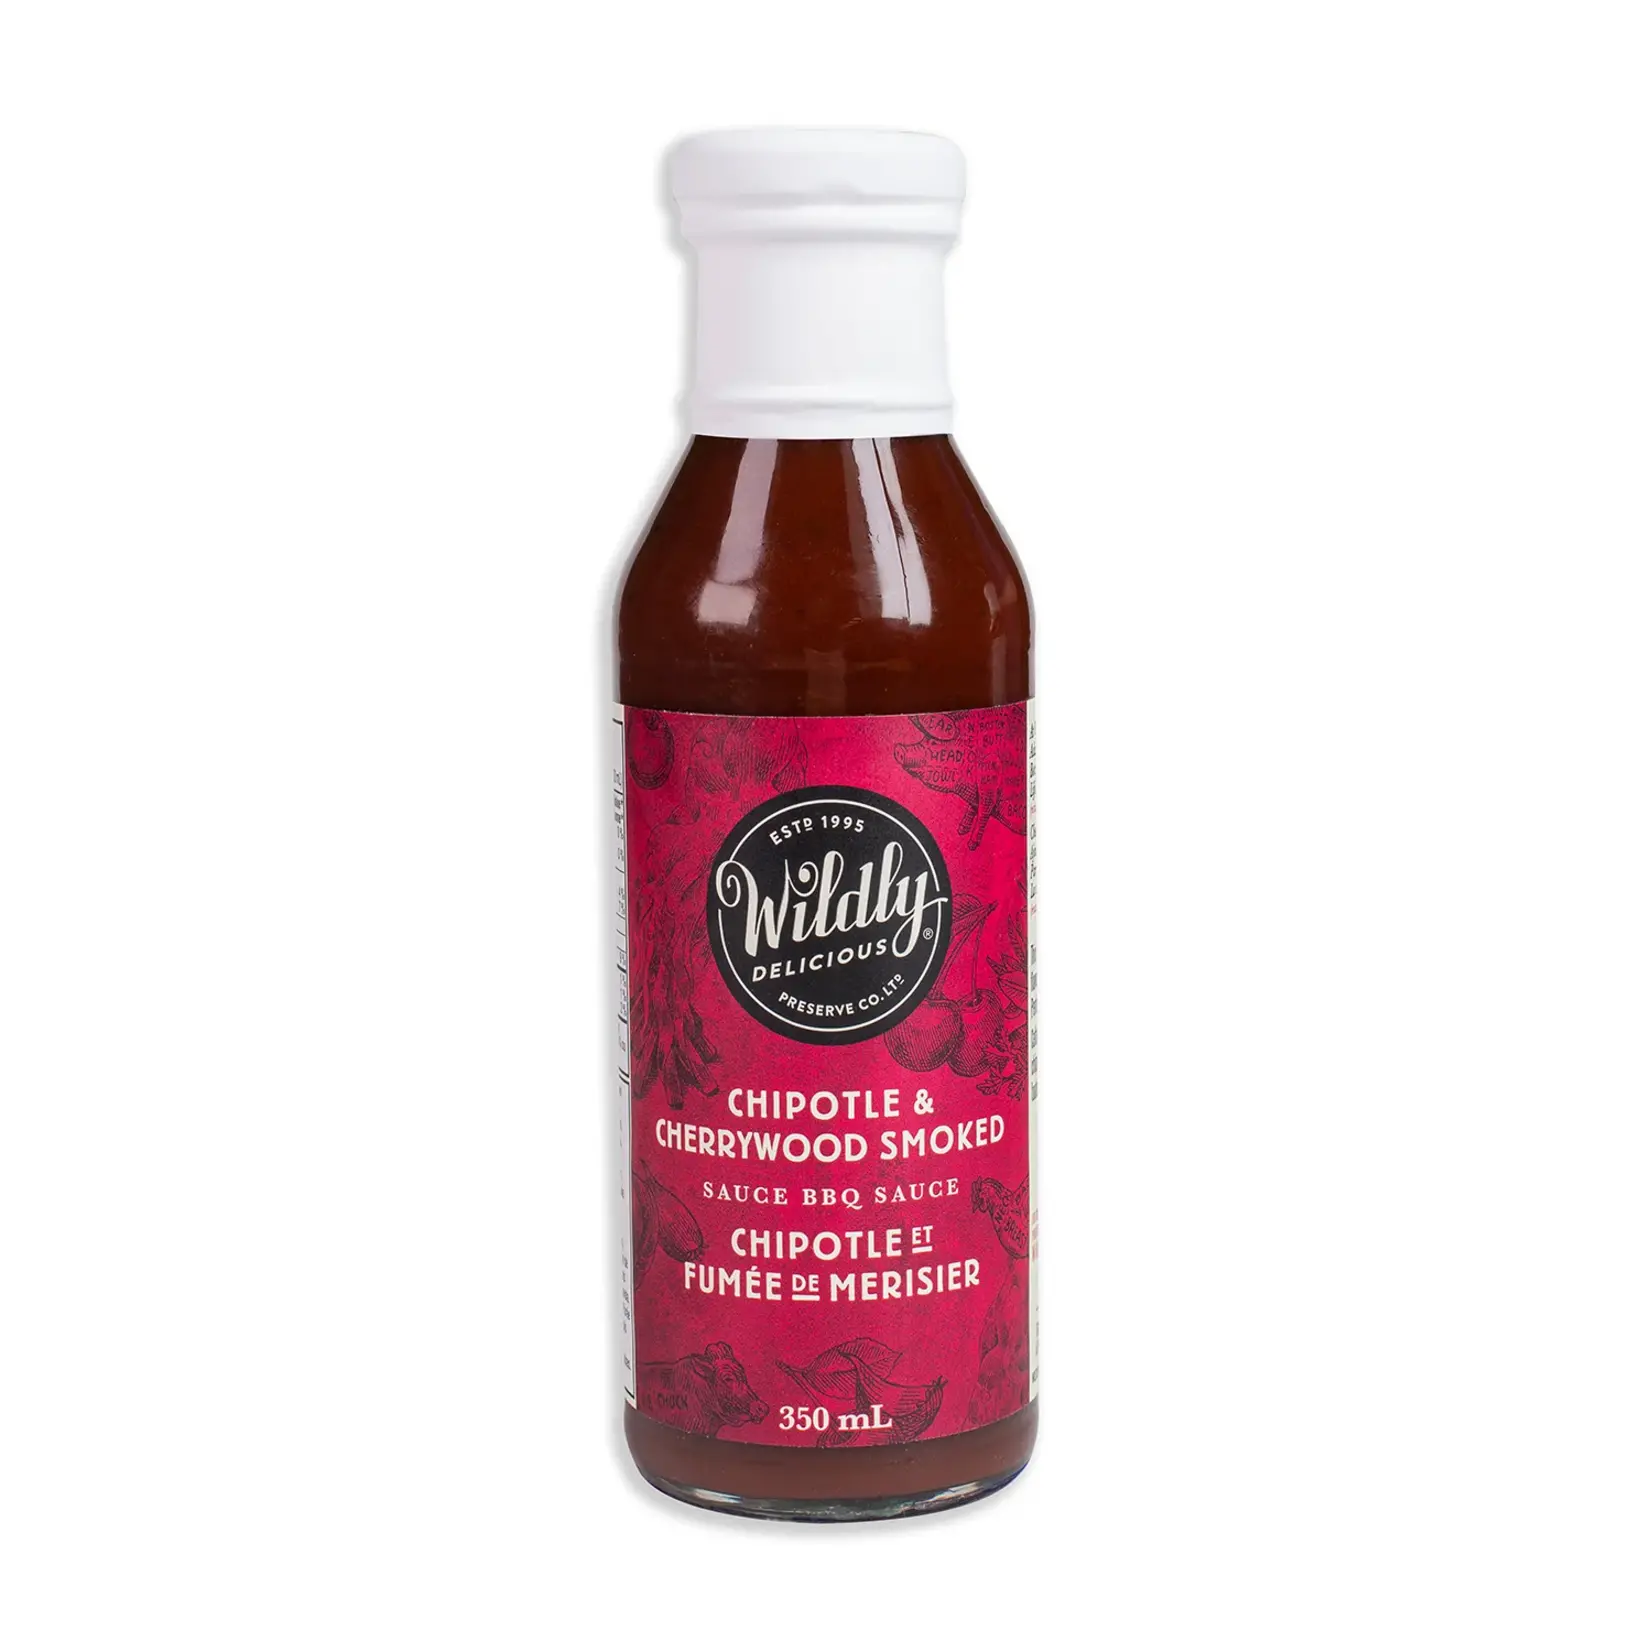 Wildly Delicious Chipotle & Cherrywood Smoked BBQ Sauce